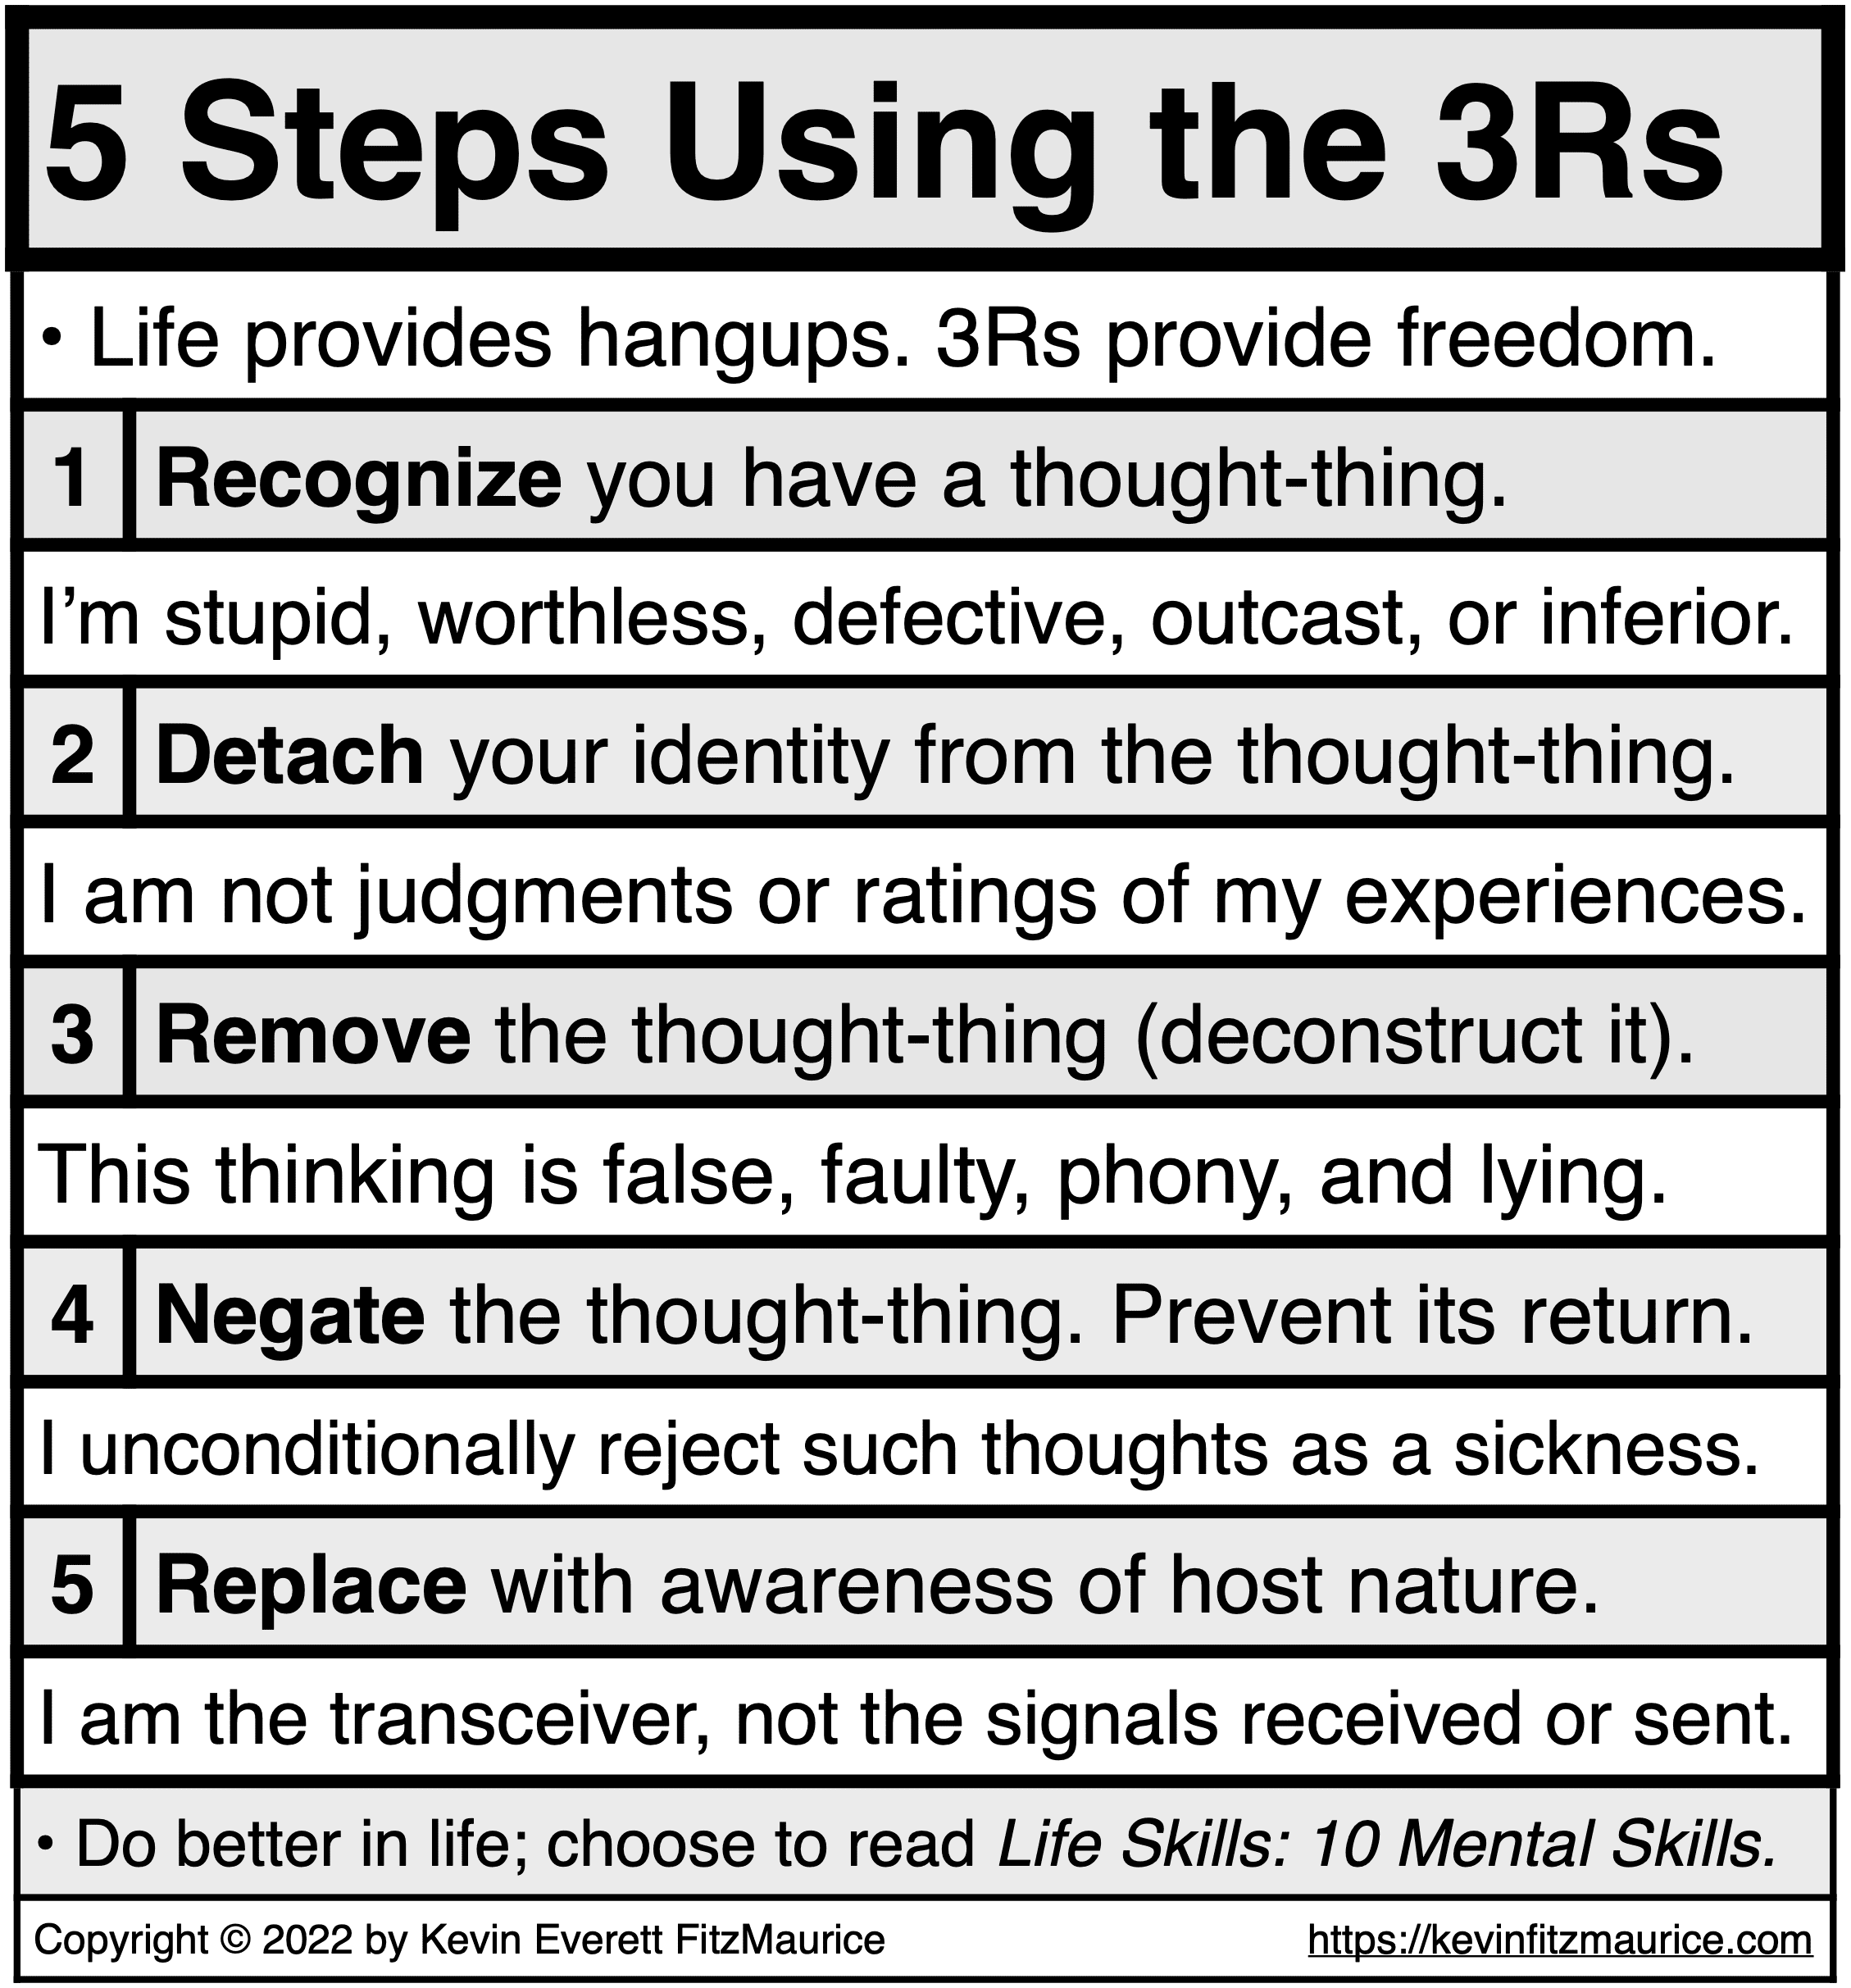 How to Use the 3Rs to Problem-Solve